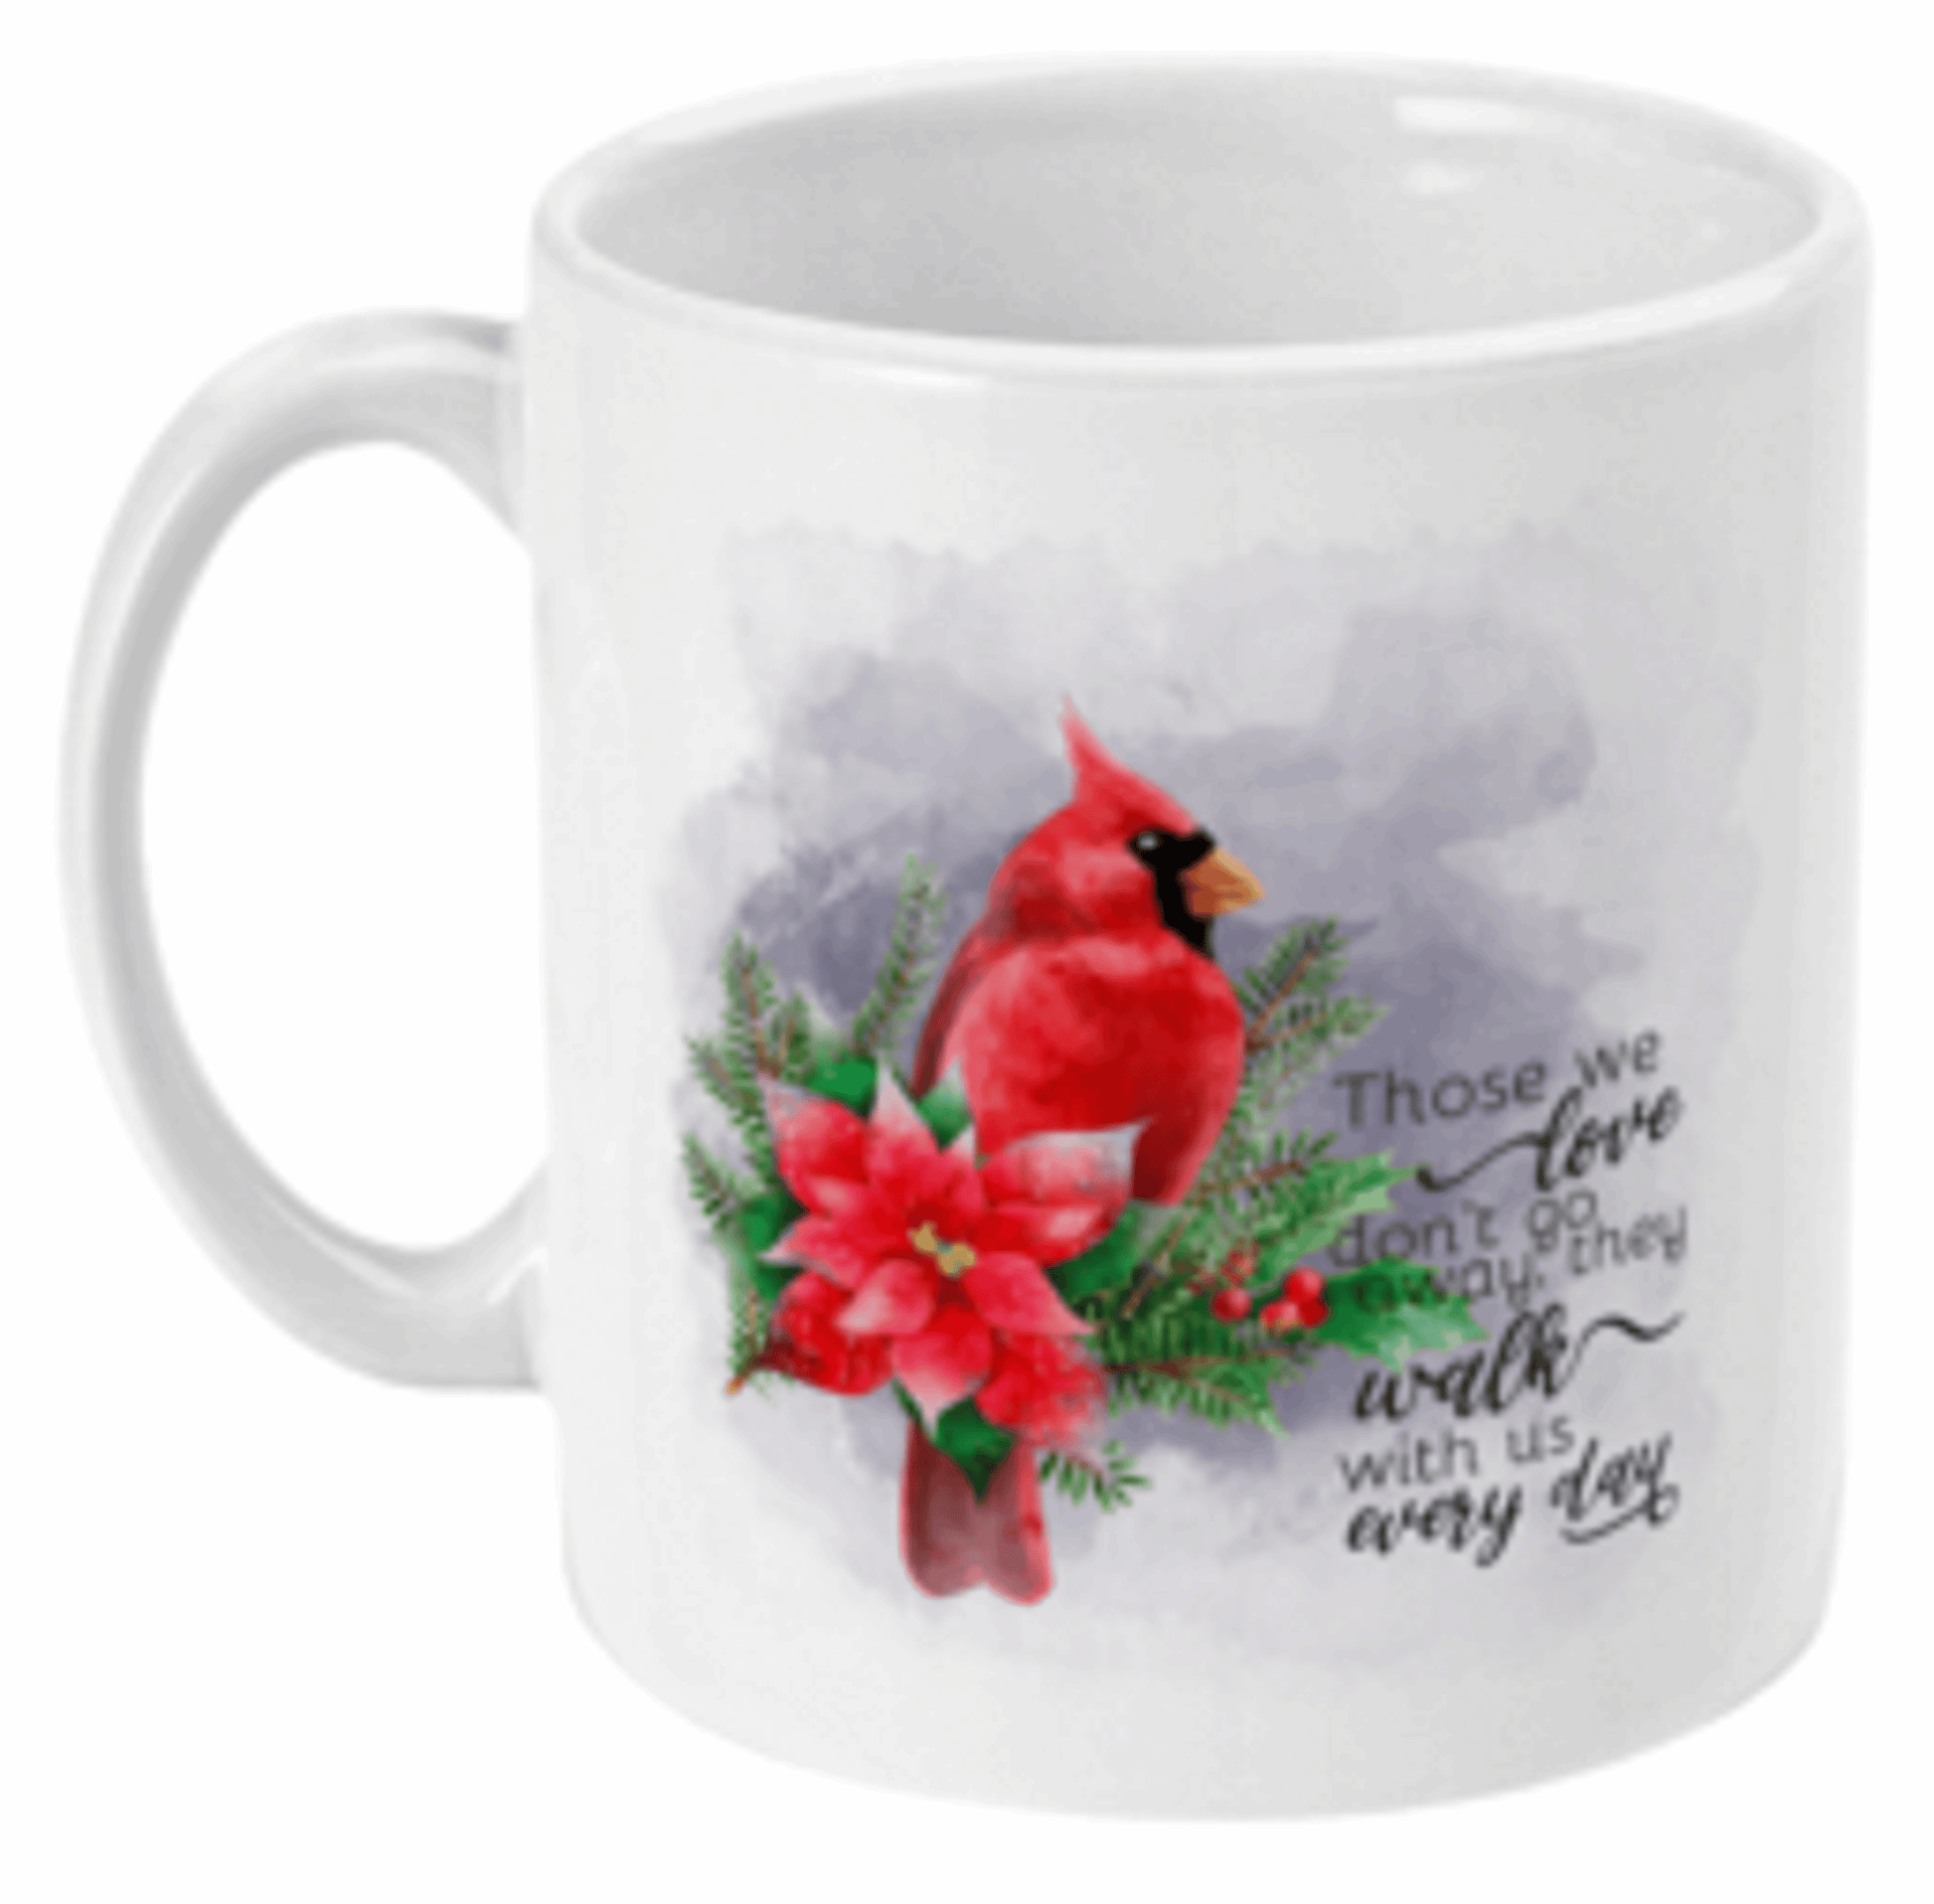  Red Cardinals Walk With You Everyday Coffee Mug by Free Spirit Accessories sold by Free Spirit Accessories